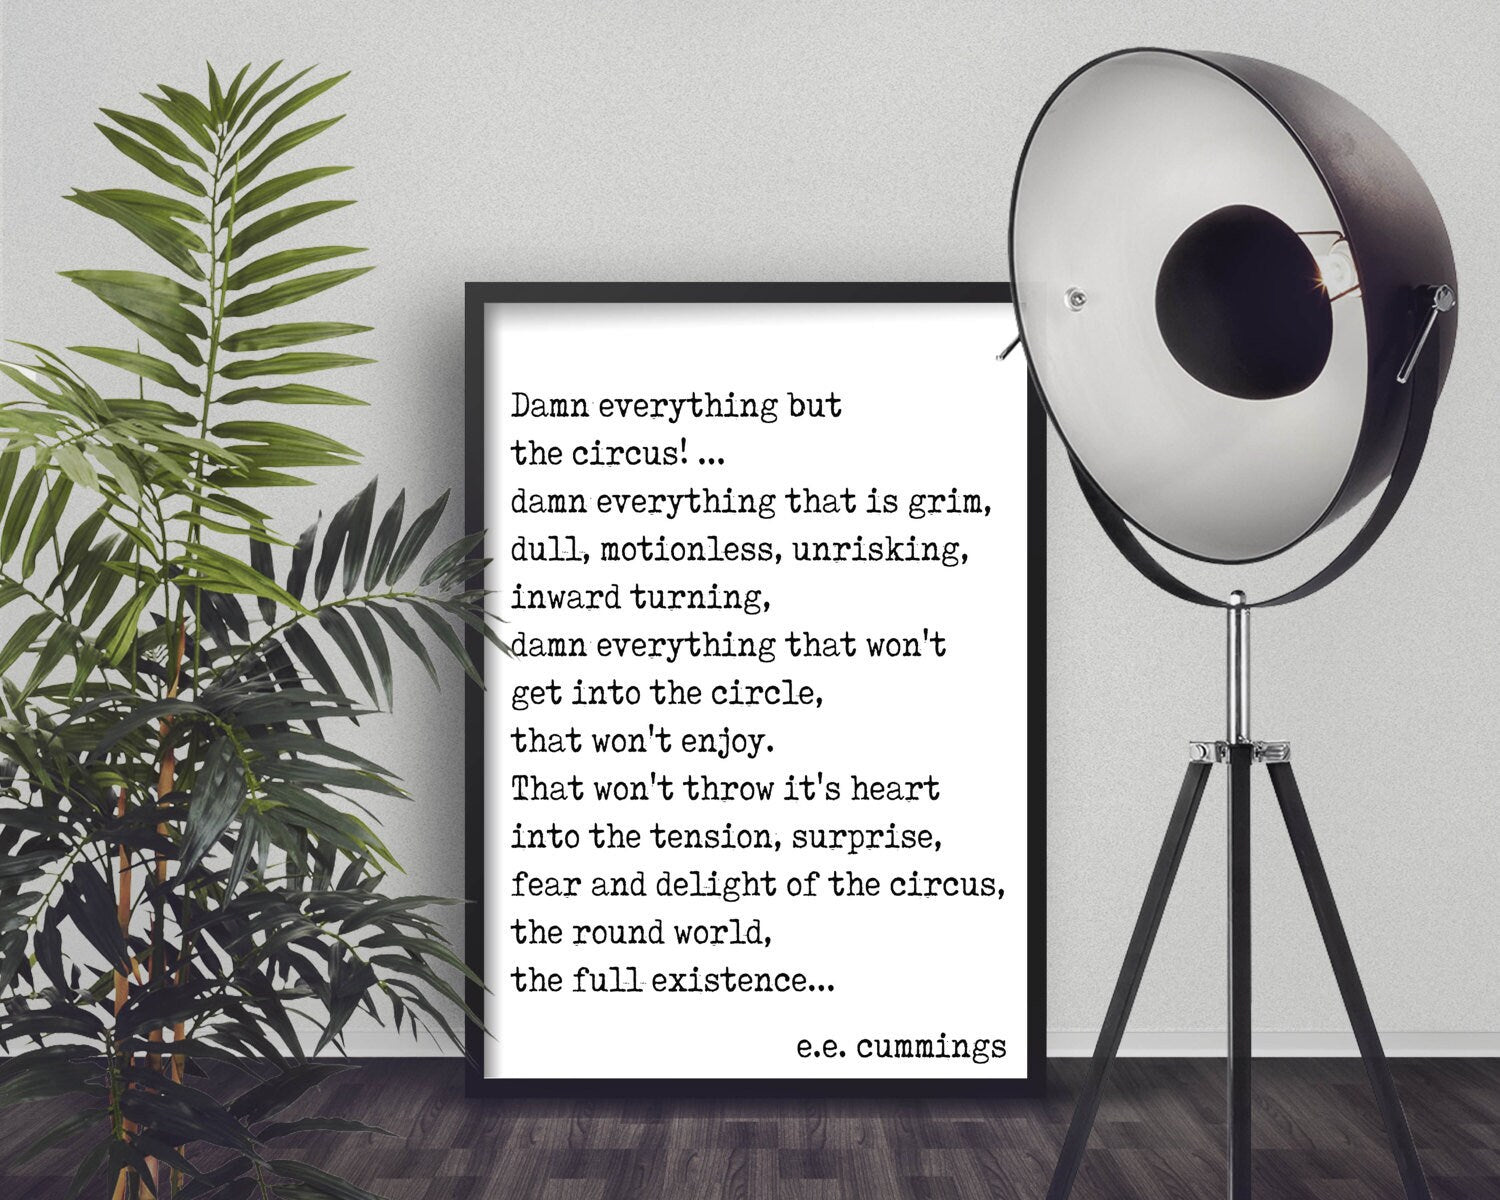 ee cummings print Damn Everything But The Circus in black and white, wall art decor literary quote unframed